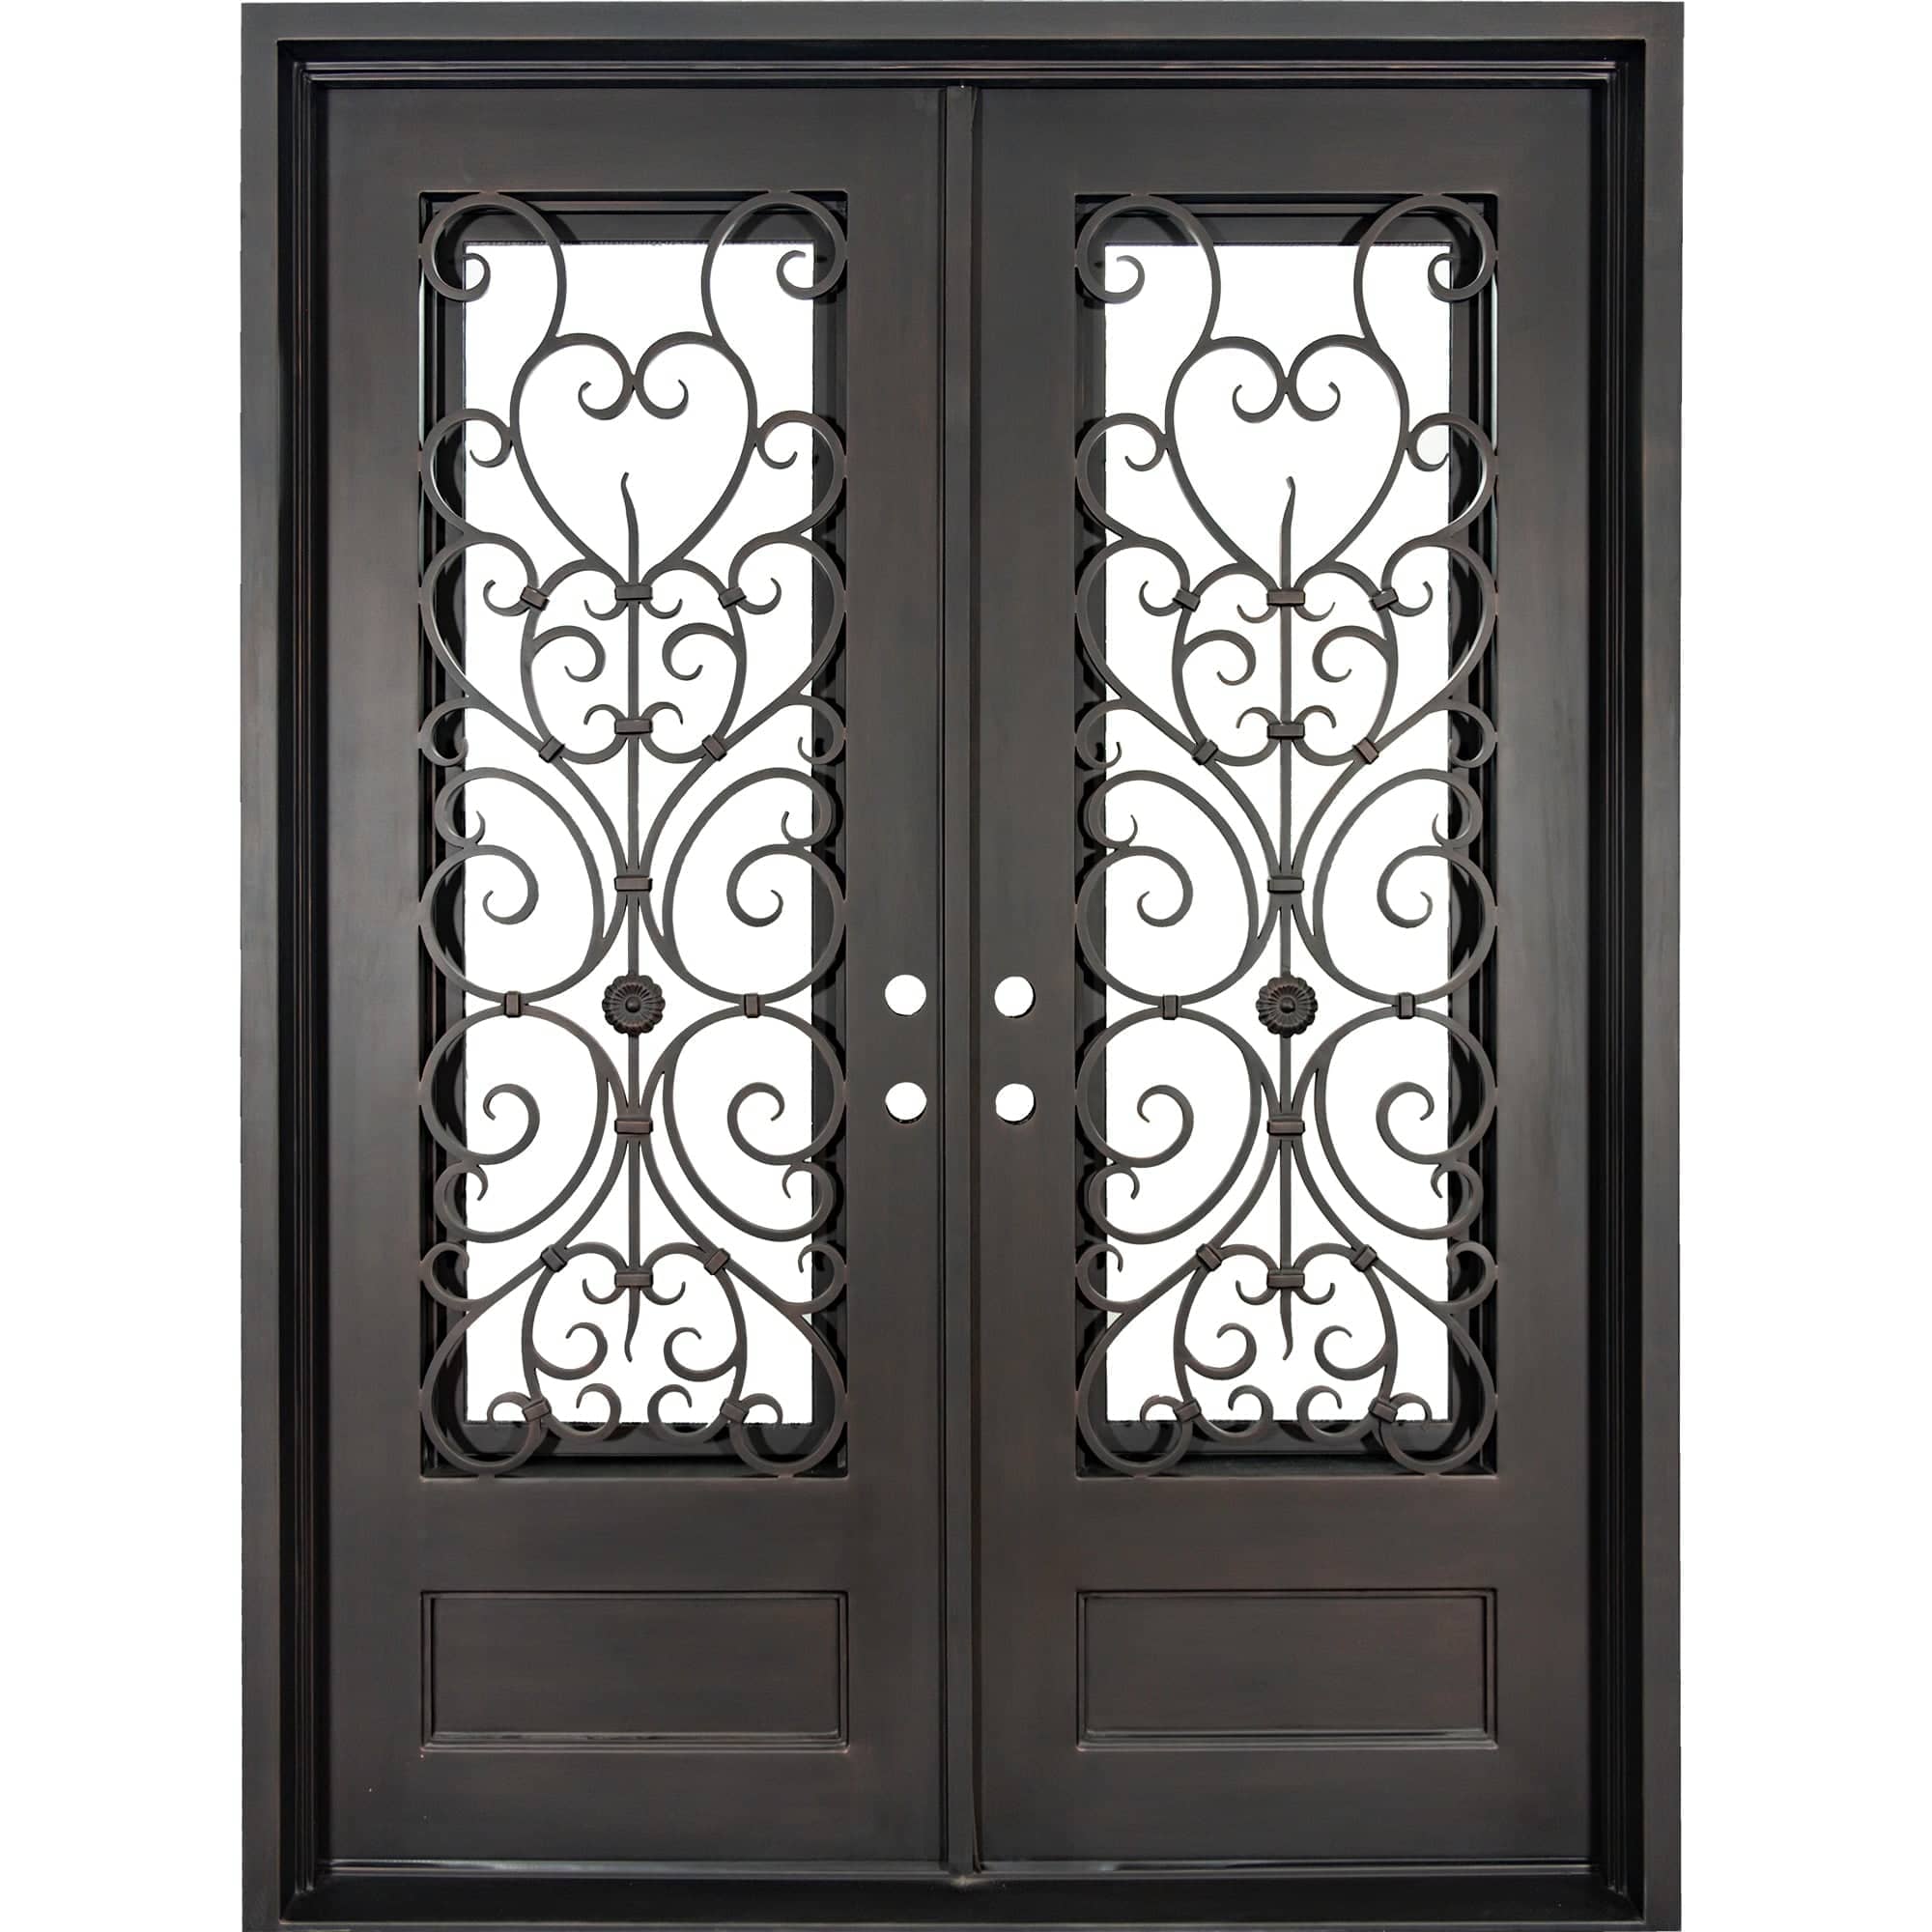 Double entryway doors made with a thick steel and iron frame. Doors have a 3/4 panel of glass behind an intricate iron design and are thermally broken to protect from extreme weather.